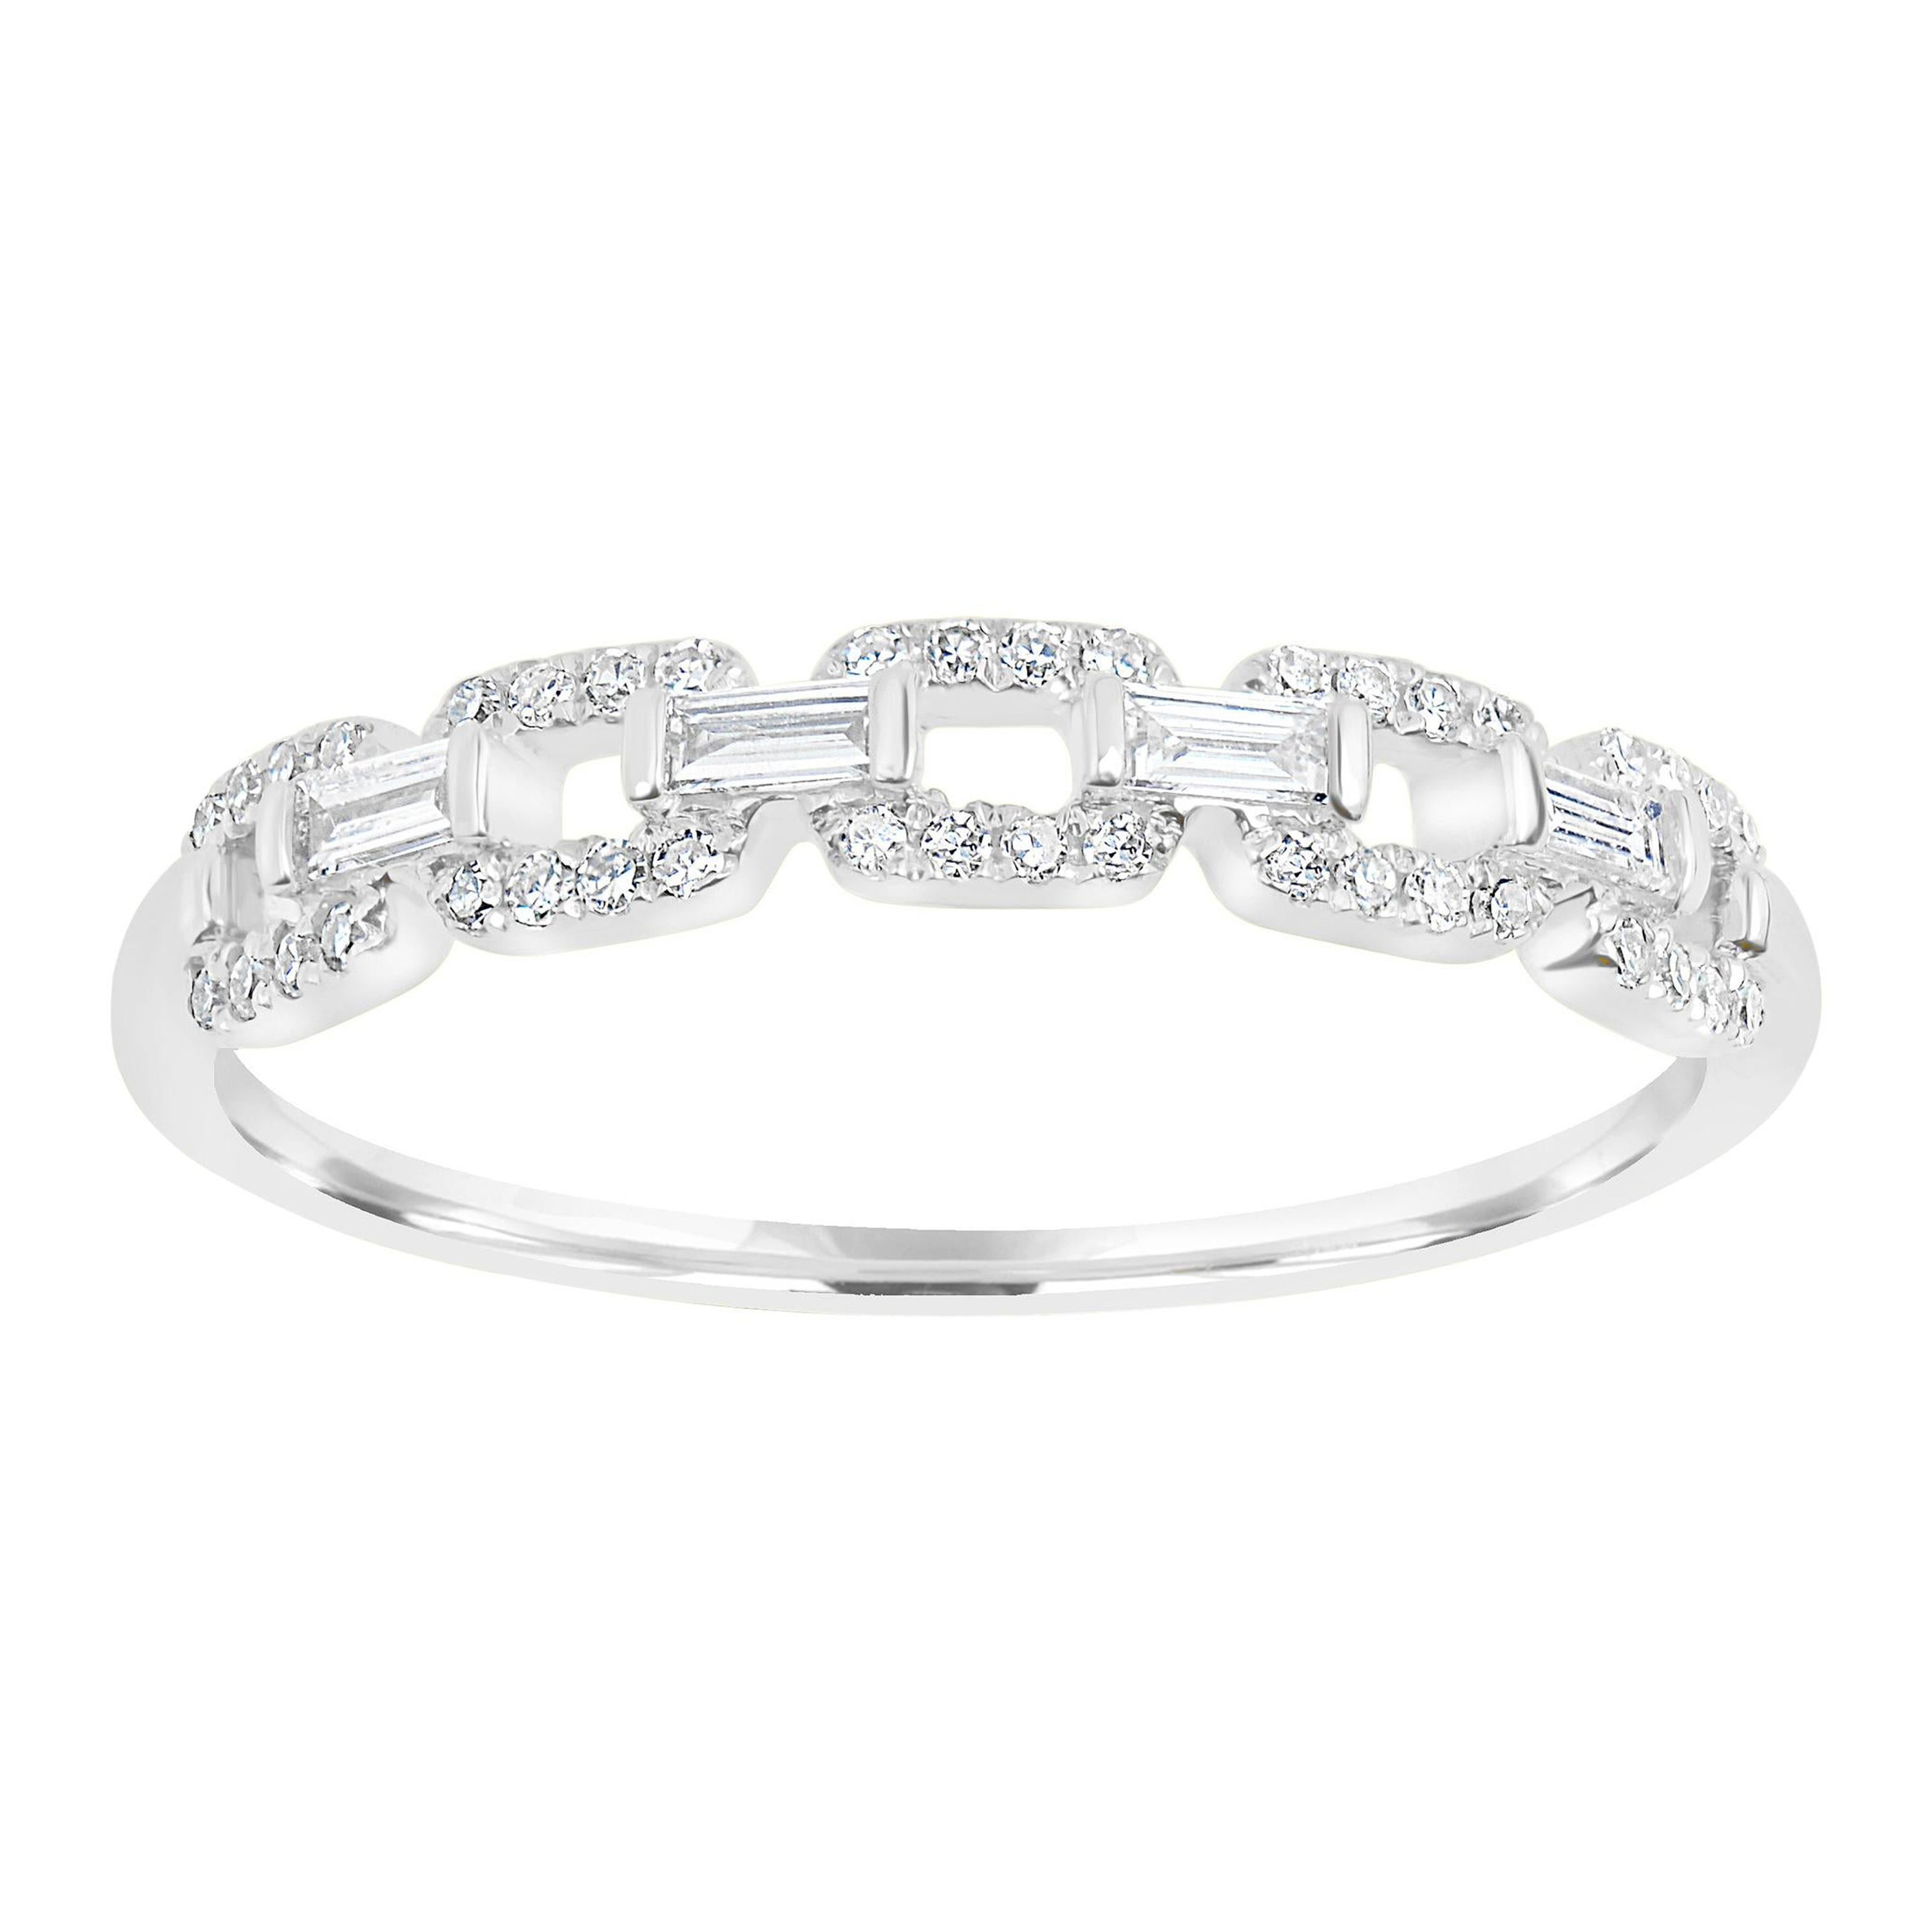 Luxle Round Pave Diamond Link Band Ring in 14k White Gold